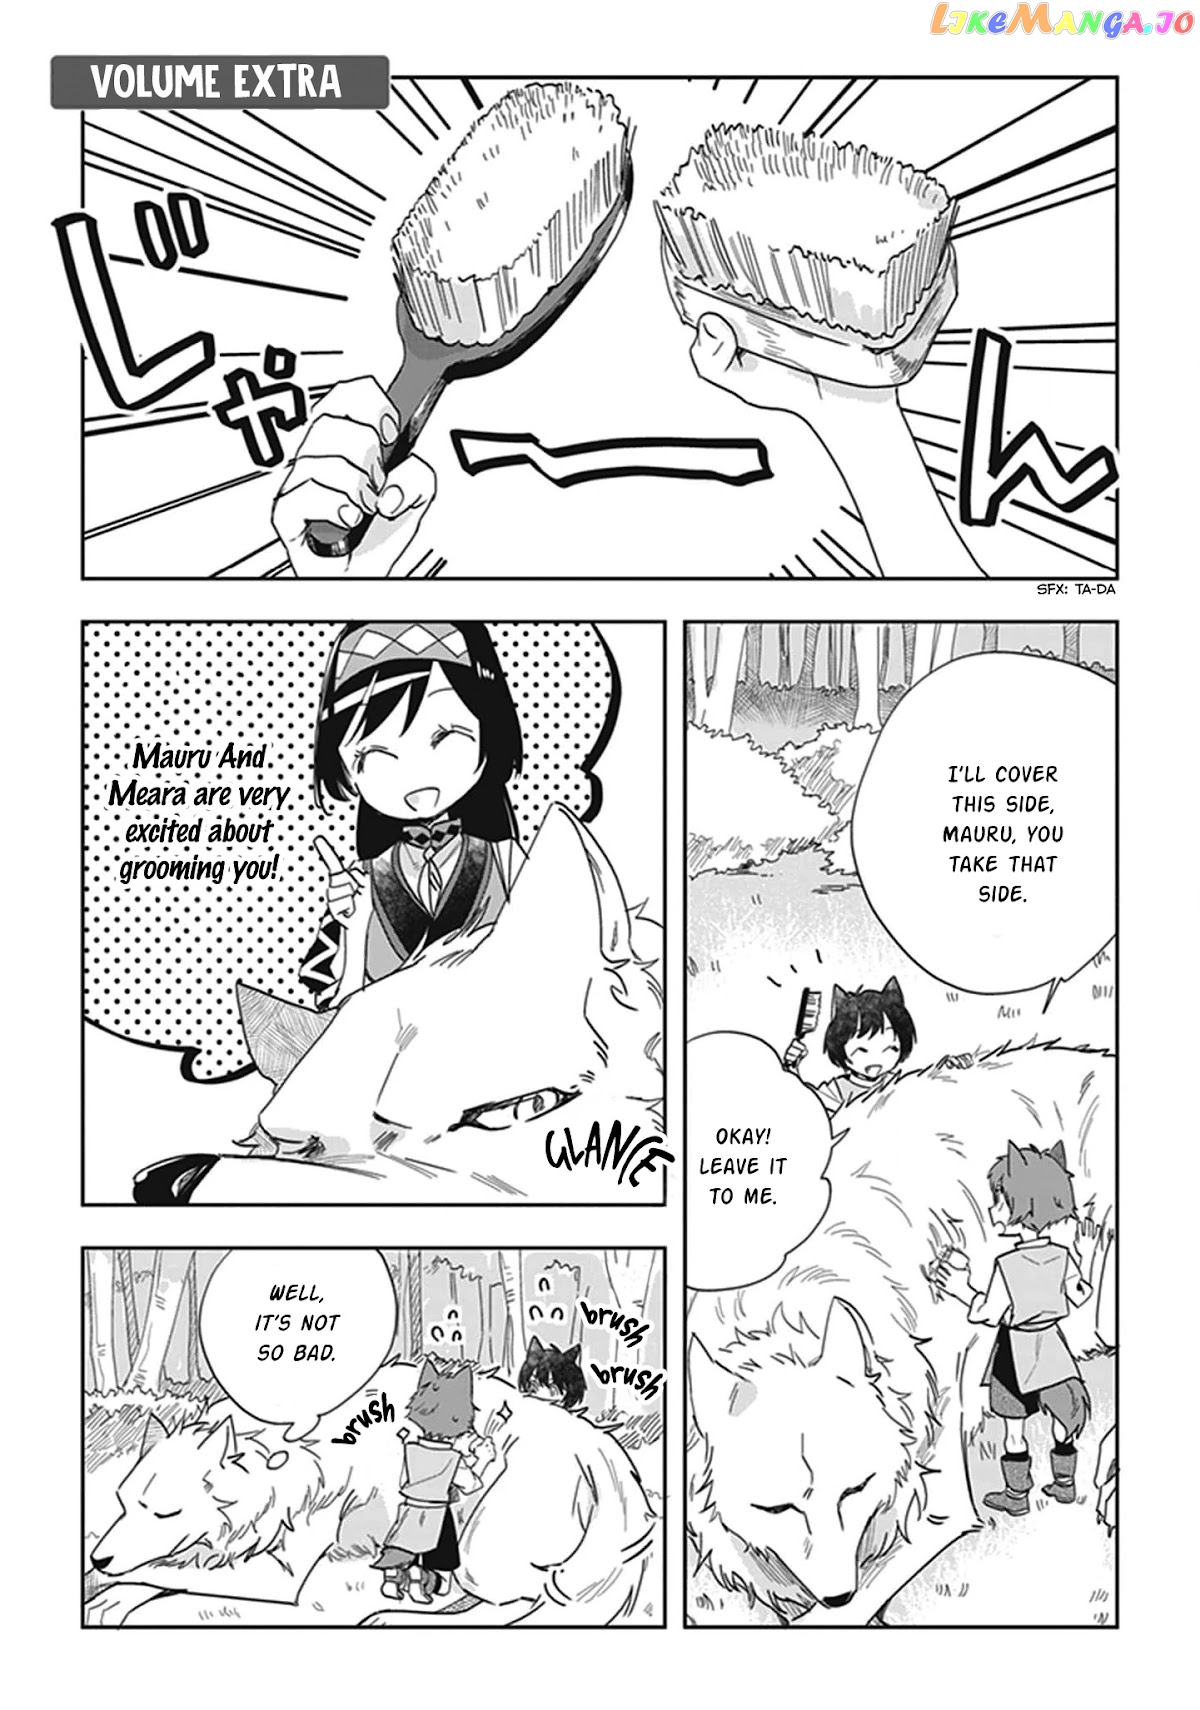 Home Centre Sales Clerk’S Life In Another World chapter 6.5 - page 1